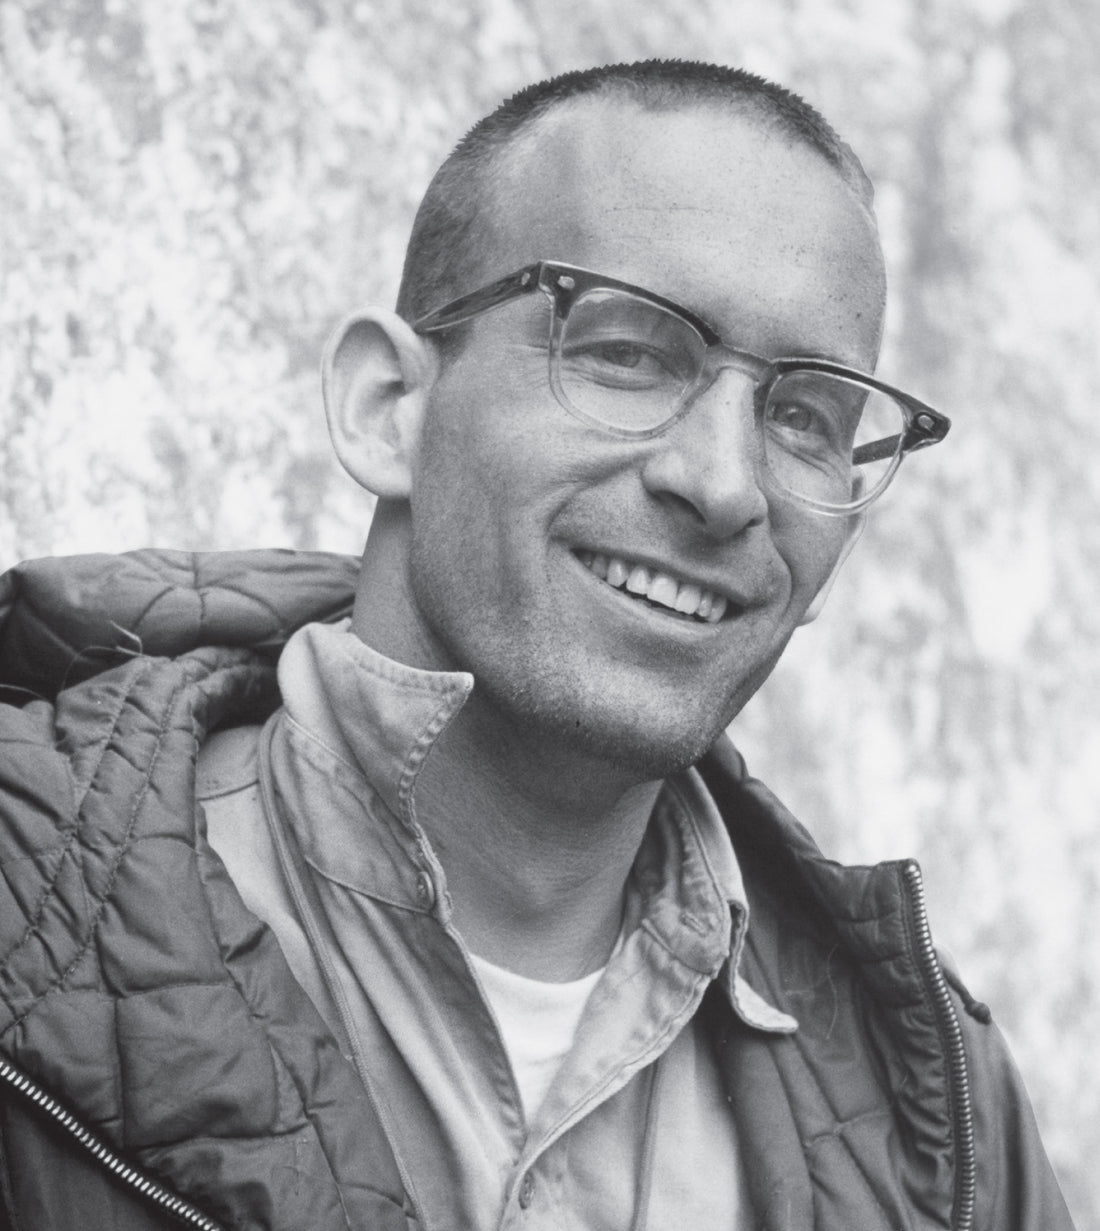 Royal Robbins is a new biography of the American climber by David Smart.